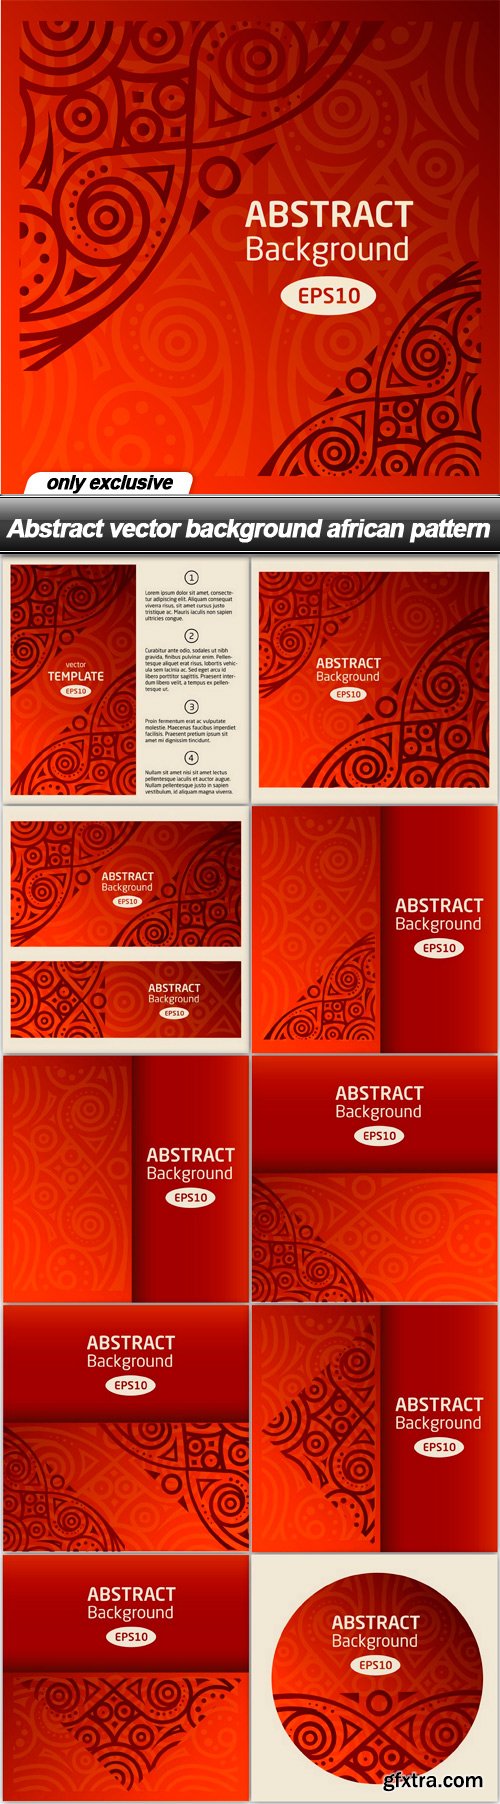 Abstract vector background african pattern - 11 EPS